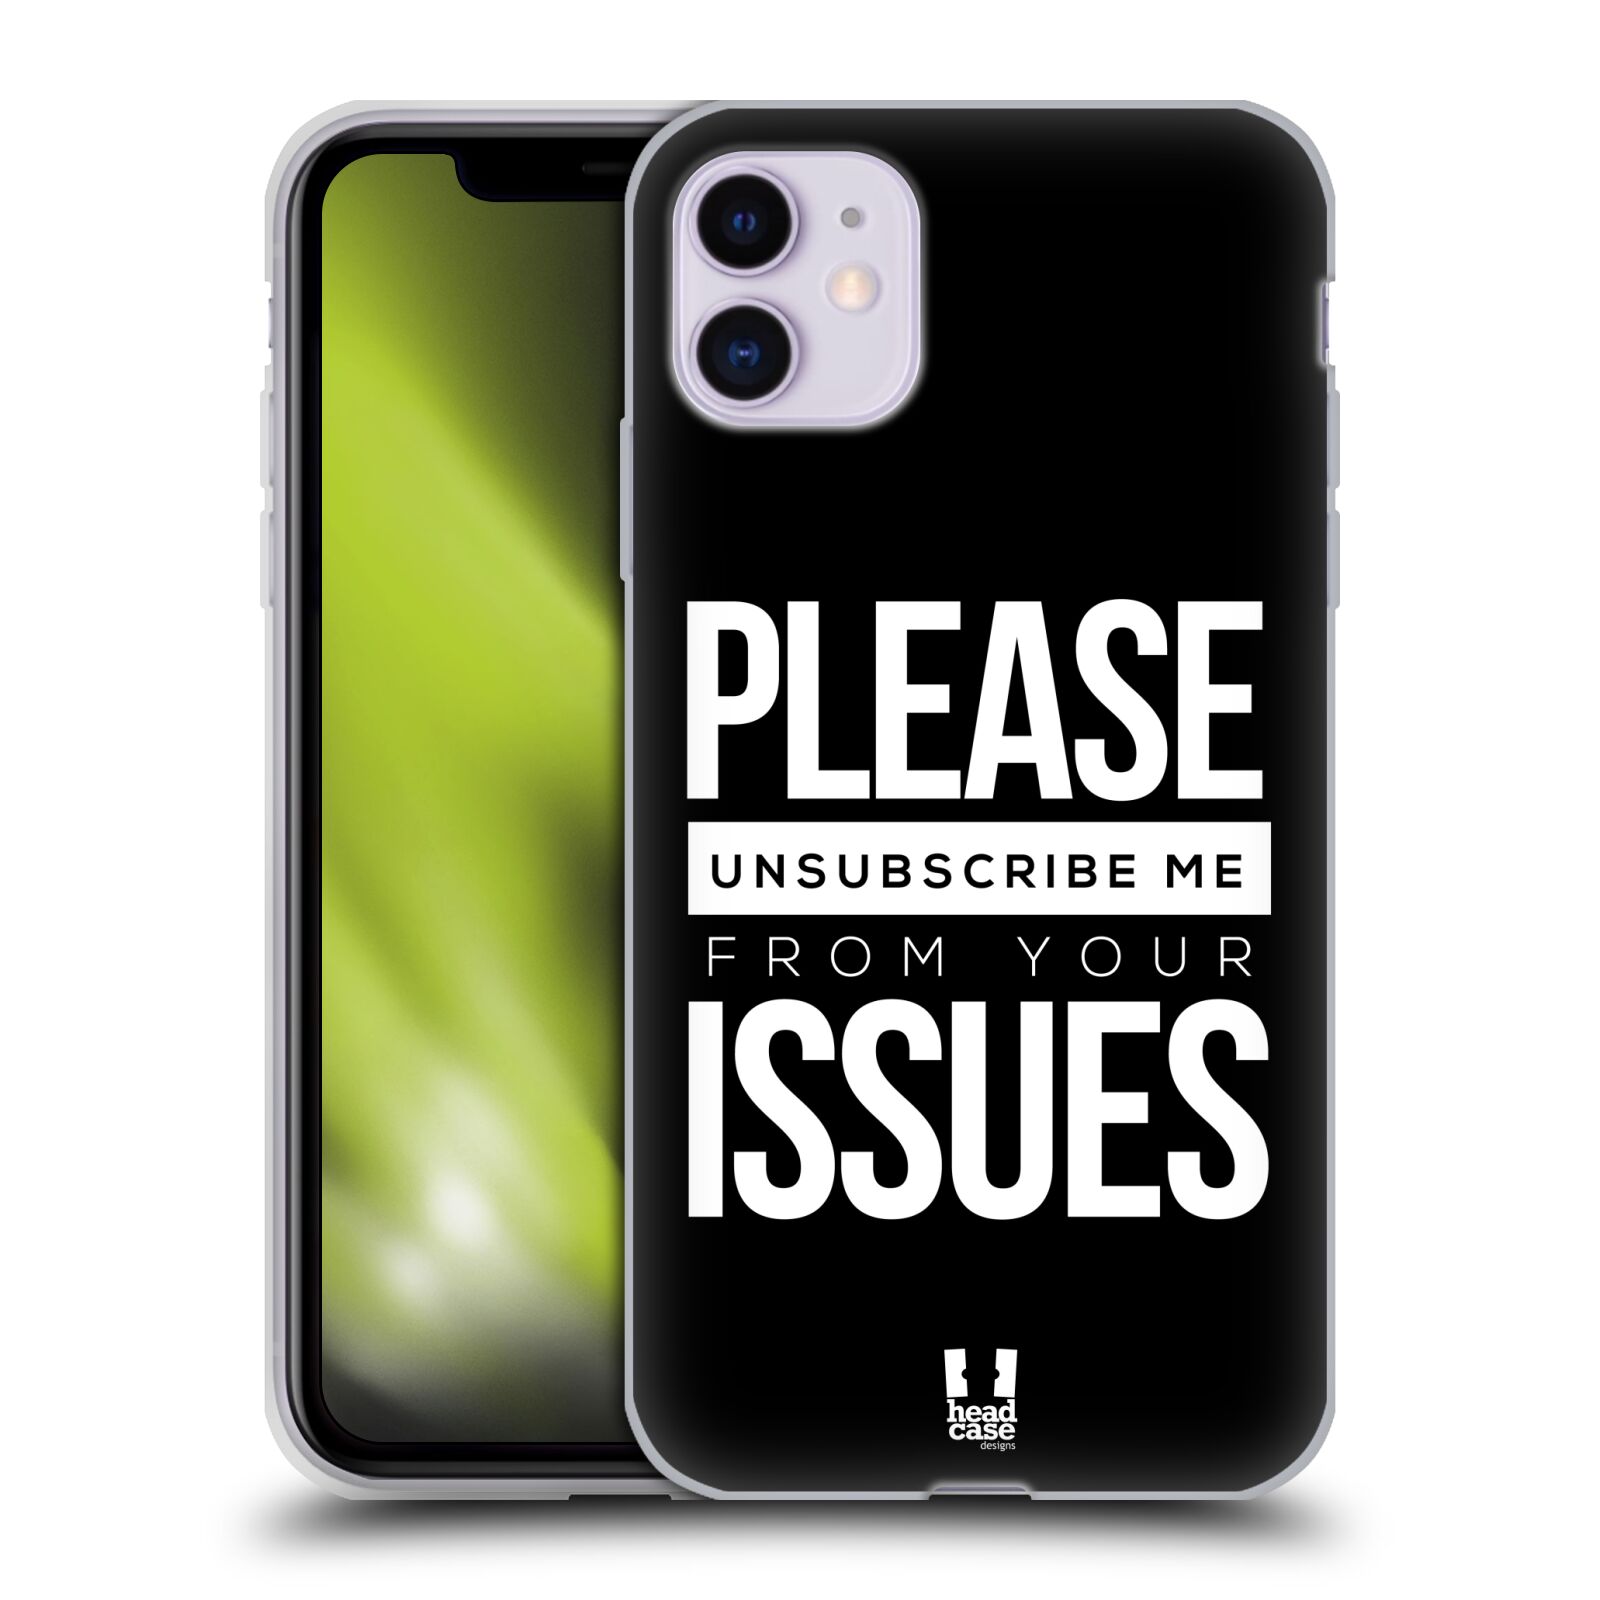 Silikonový obal na mobil Apple Iphone 11 - HEAD CASE - Please Unsubscribe Me